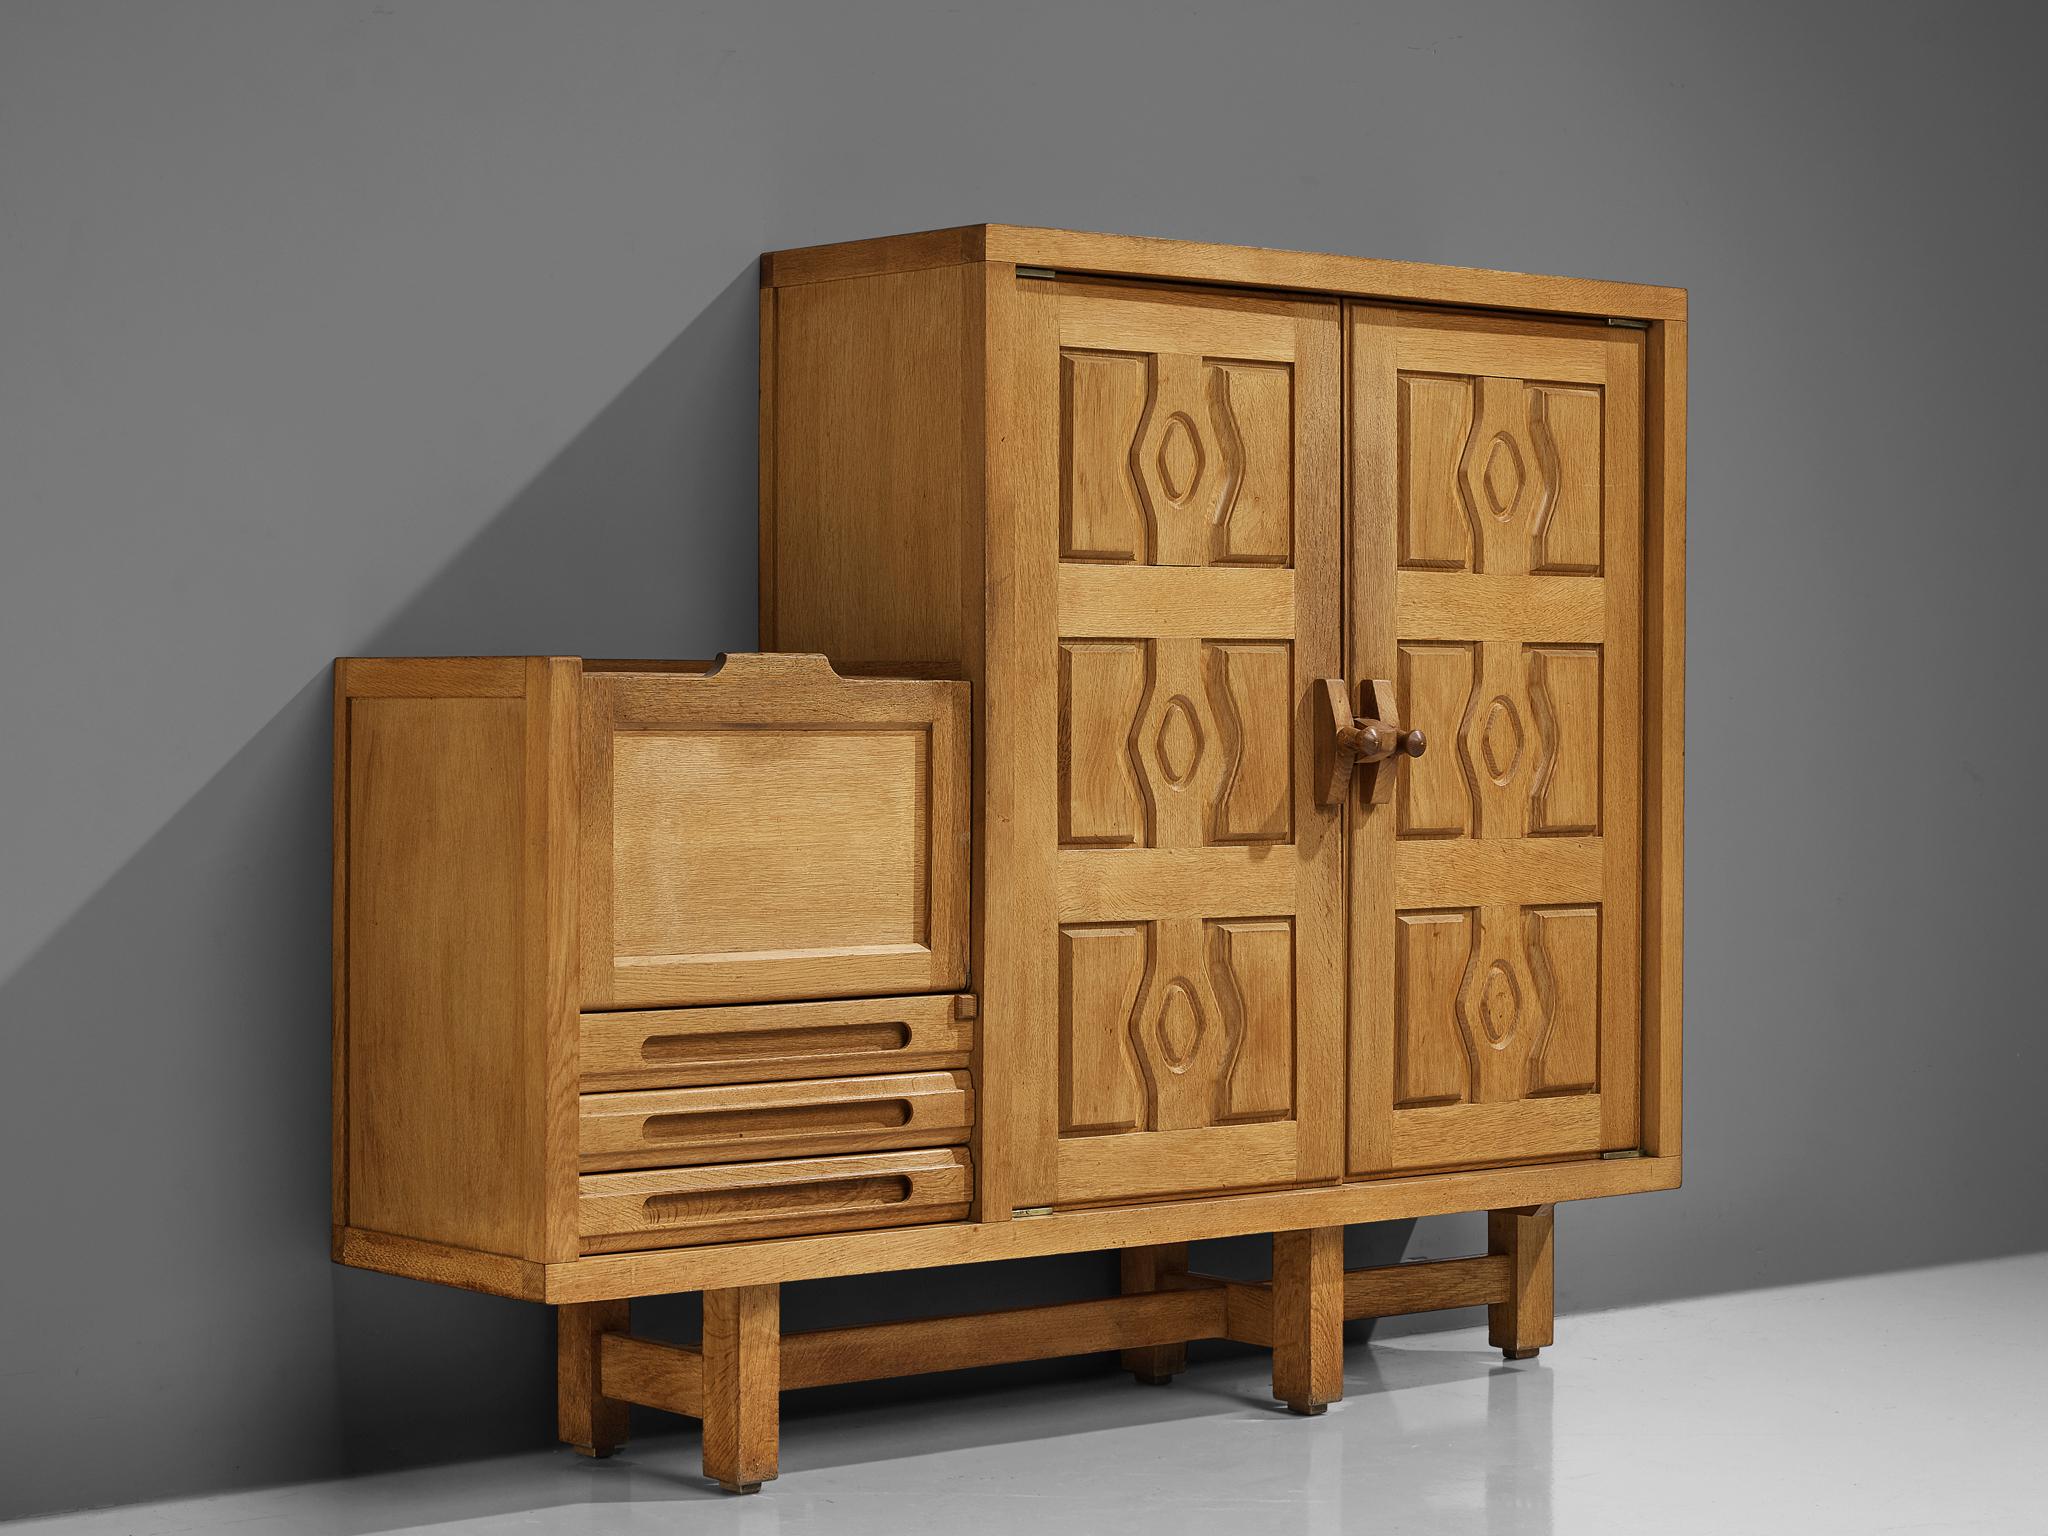 Guillerme and Chambron, cabinet, model 'Thierry', oak, France, 1960s.

This model 'Thierry' case piece is designed by Guillerme and Chambron. It features geometric engravings in the doors of the high part, with sculptural handles. On the inside, it